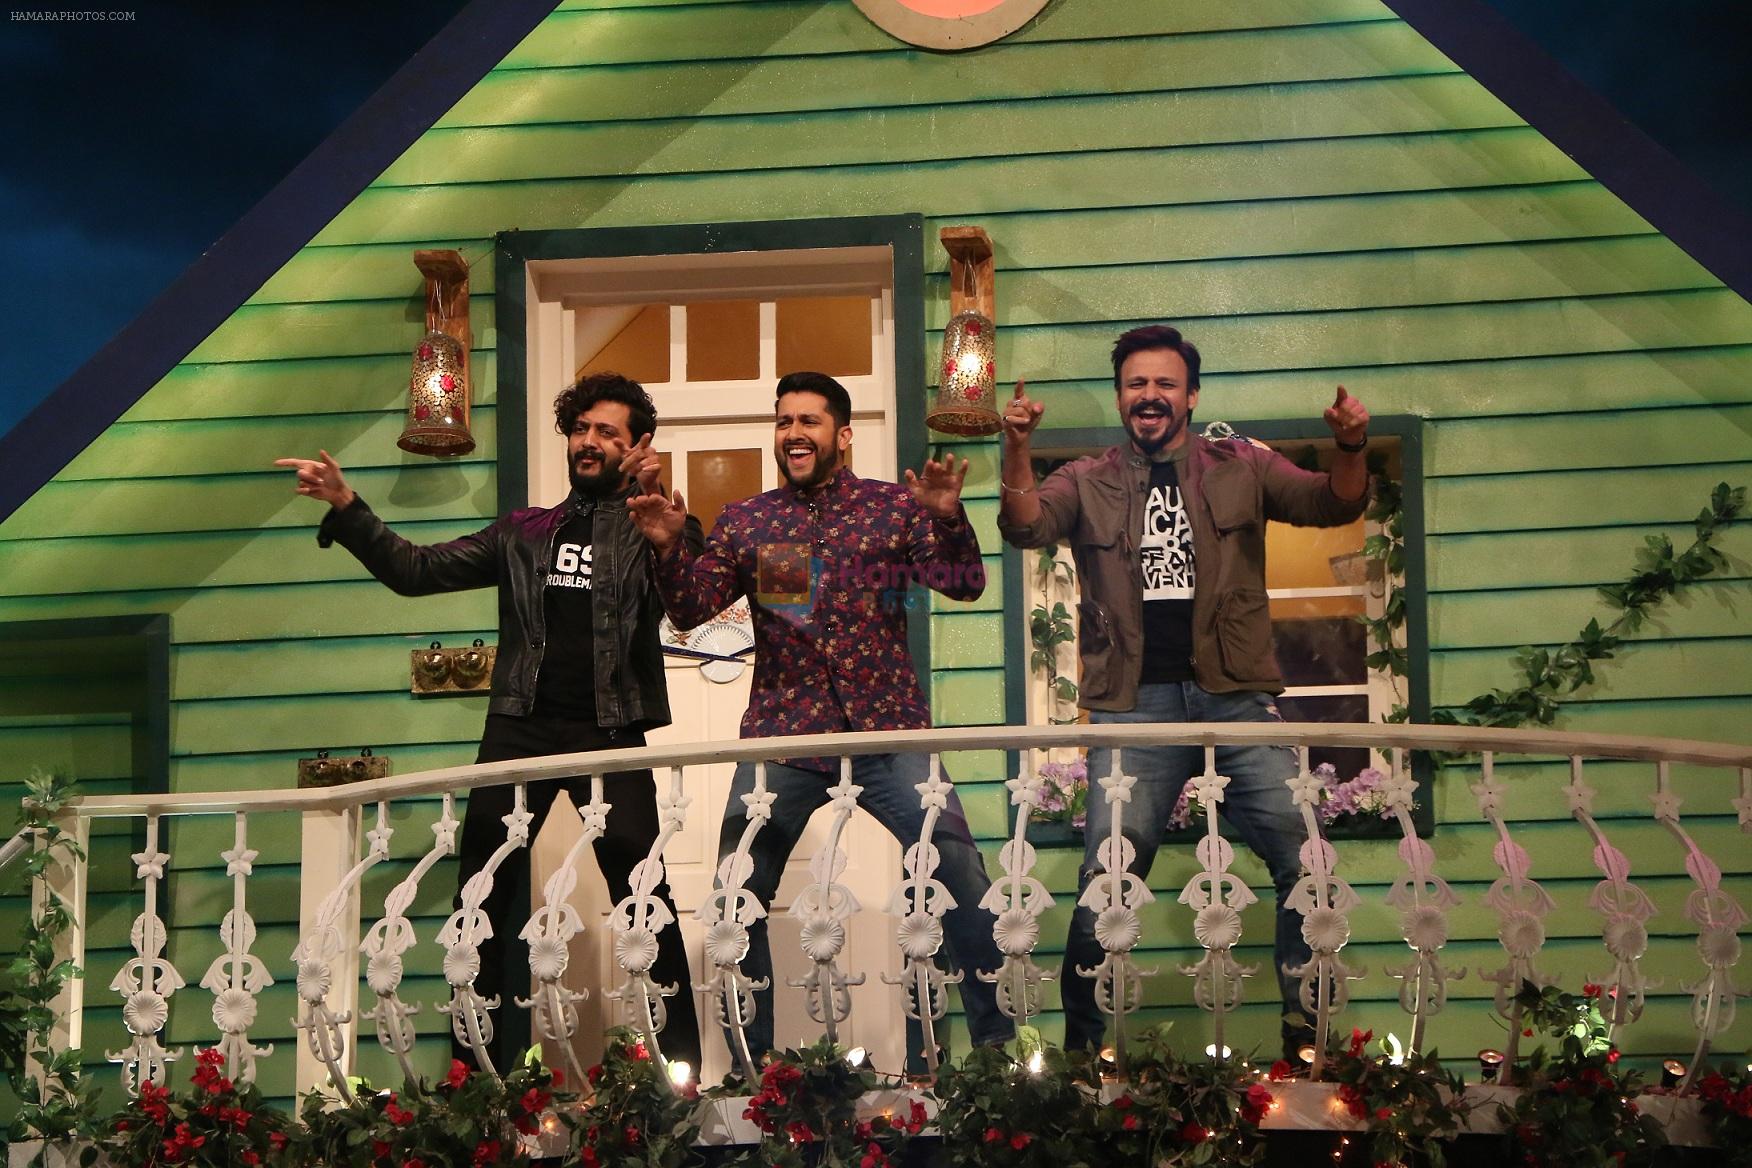 Great Grand Masti promotion on the sets of The Kapil Sharma Show